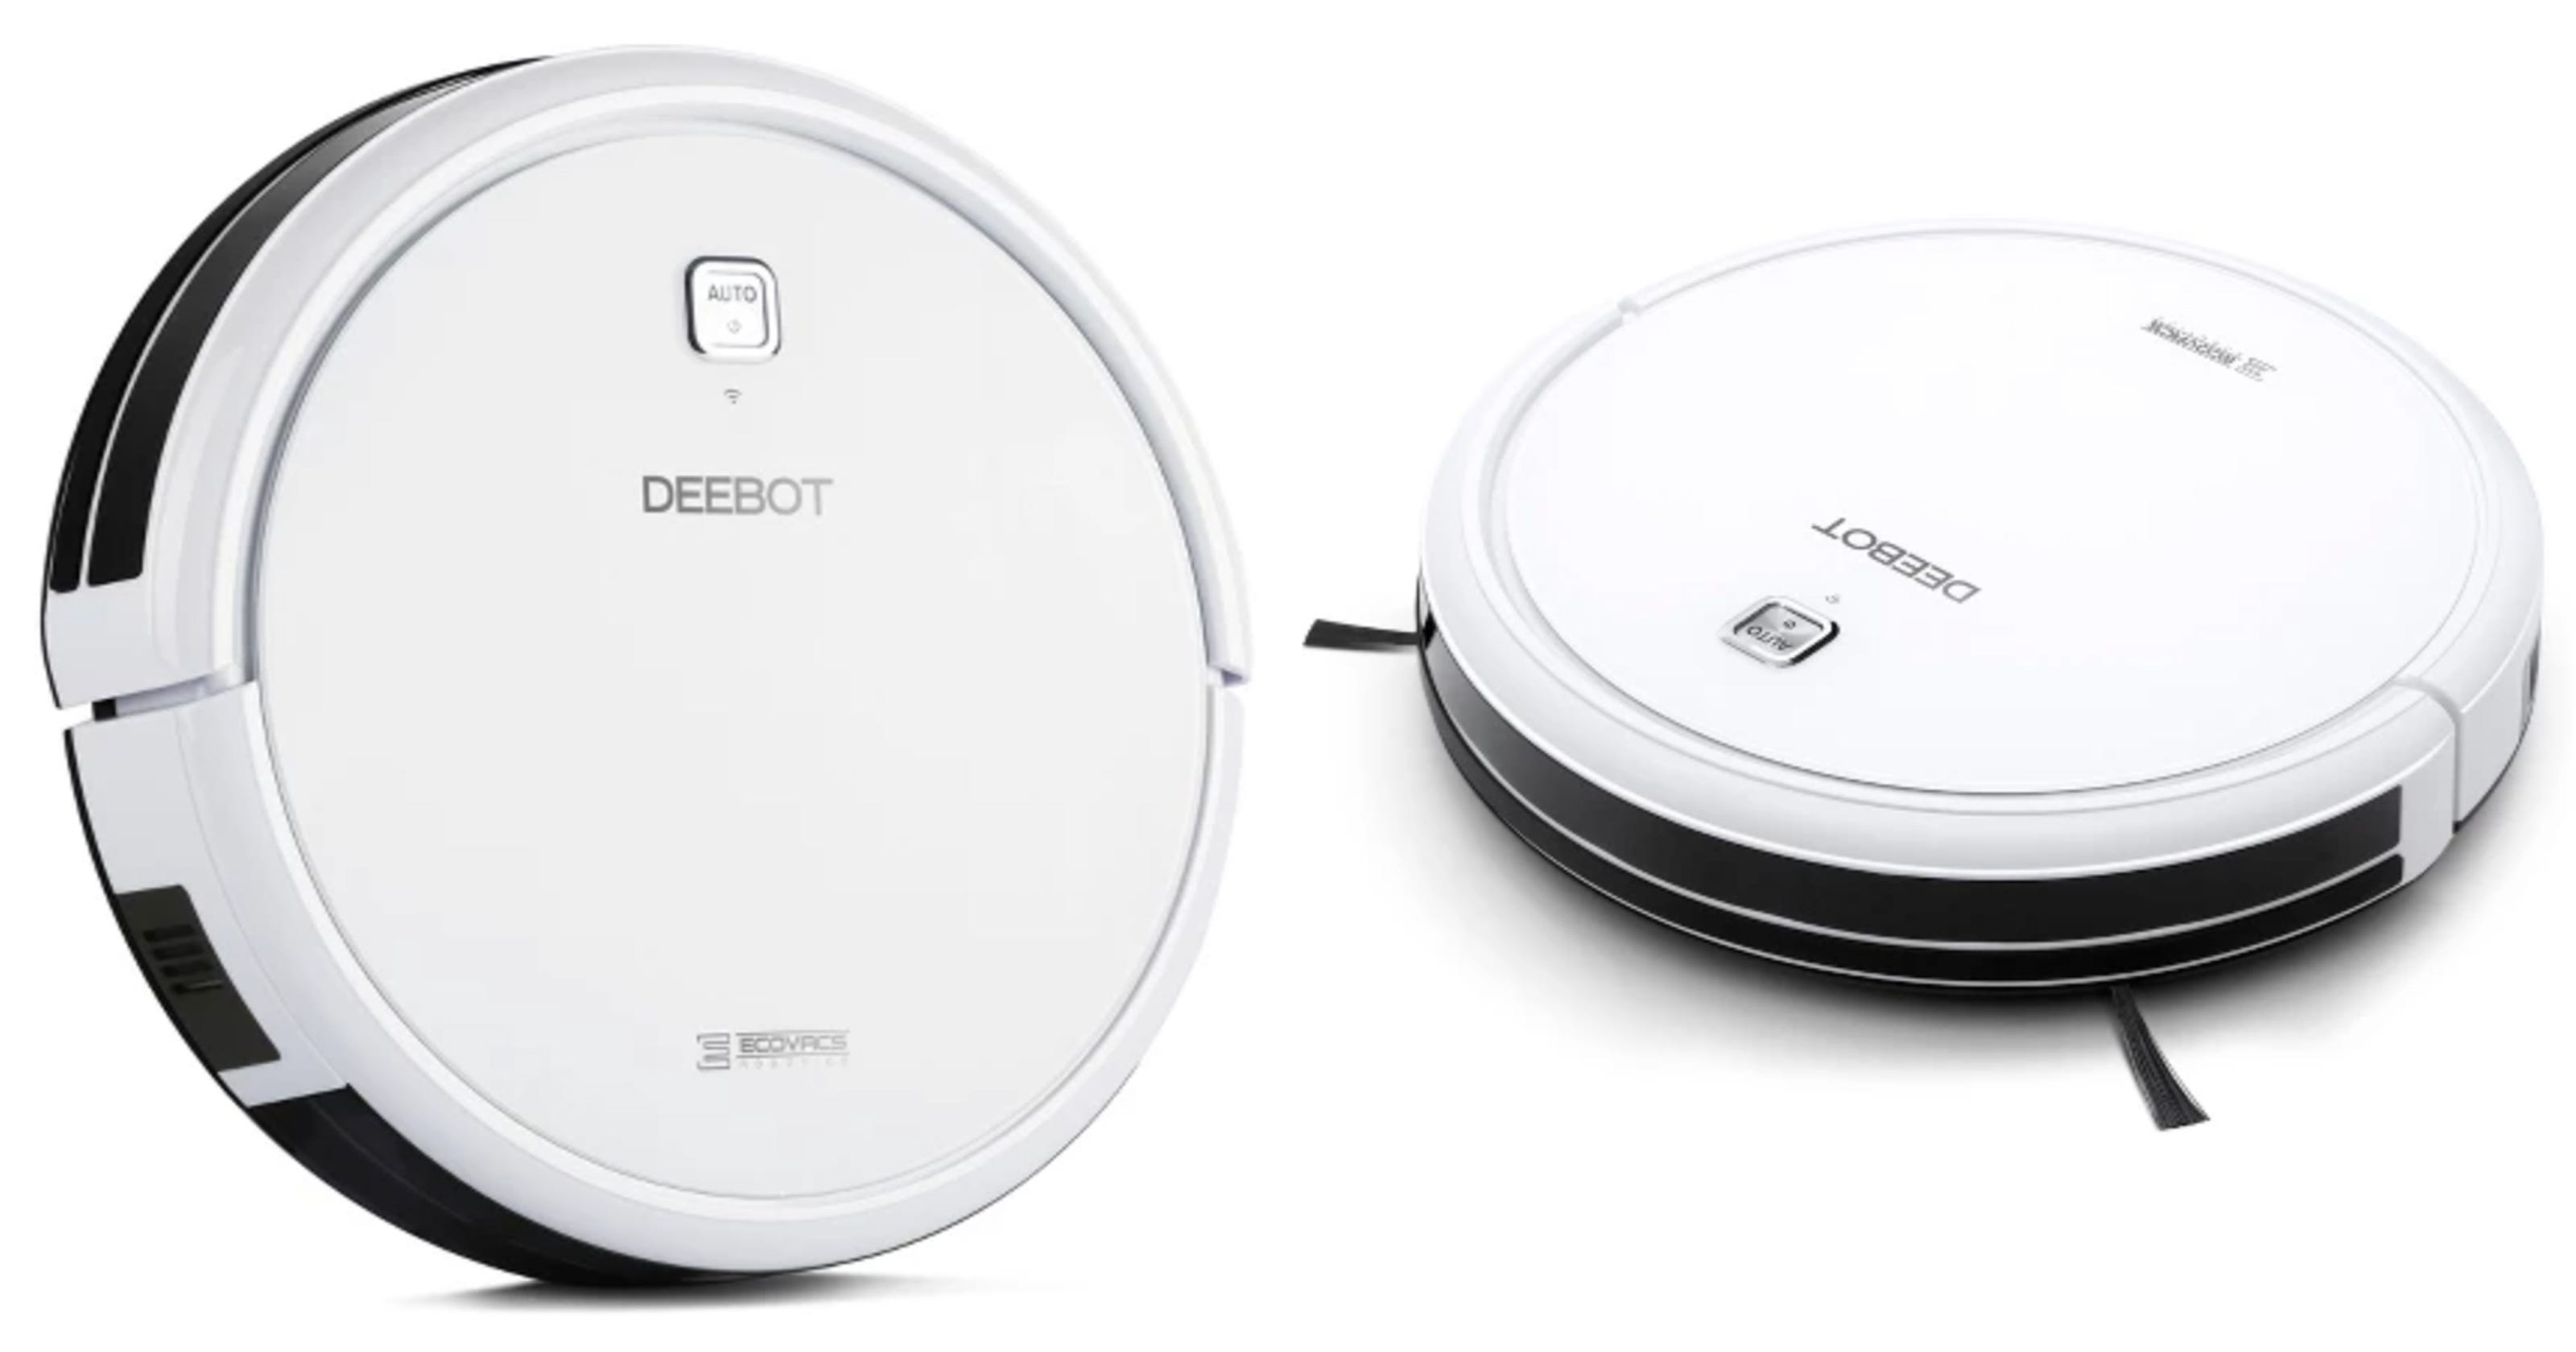 Ecovacs Deebot N79W: This award-winning robot vacuum is at its lowest price at Target